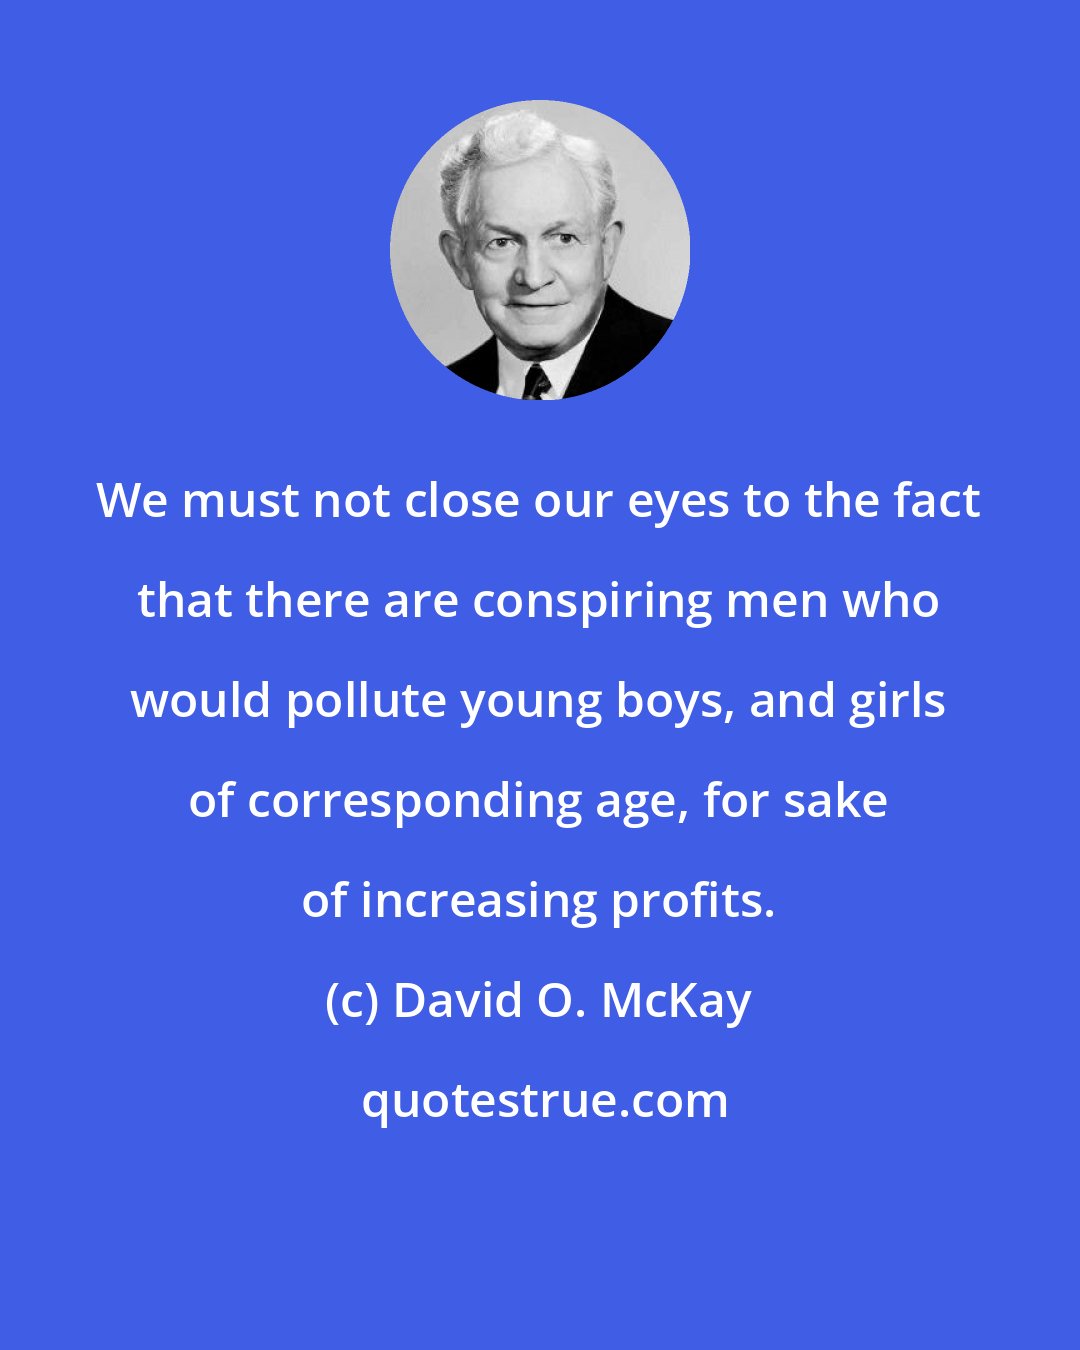 David O. McKay: We must not close our eyes to the fact that there are conspiring men who would pollute young boys, and girls of corresponding age, for sake of increasing profits.